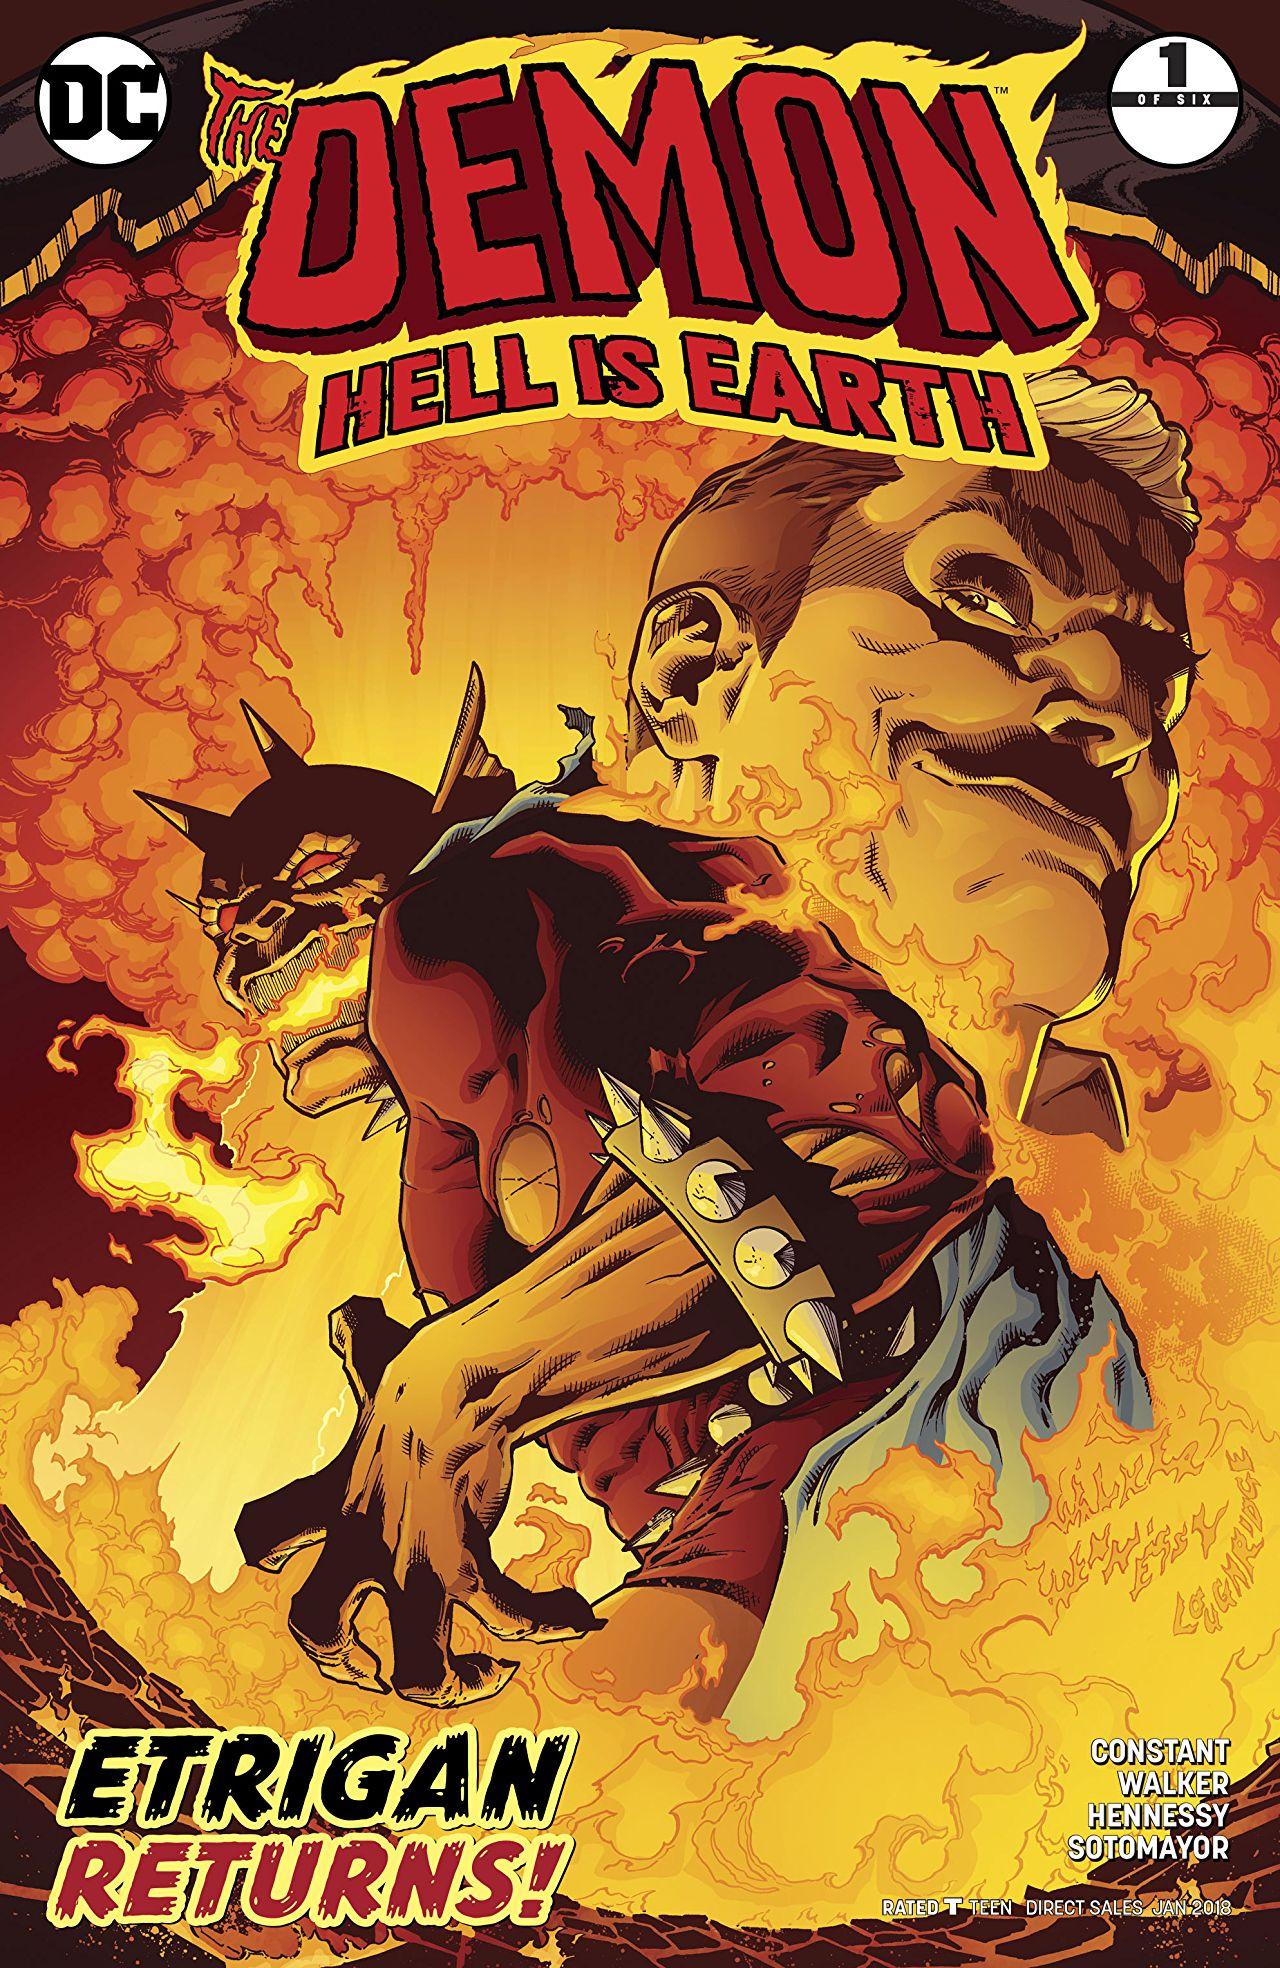 The Demon: Hell Is Earth Vol. 1 #1